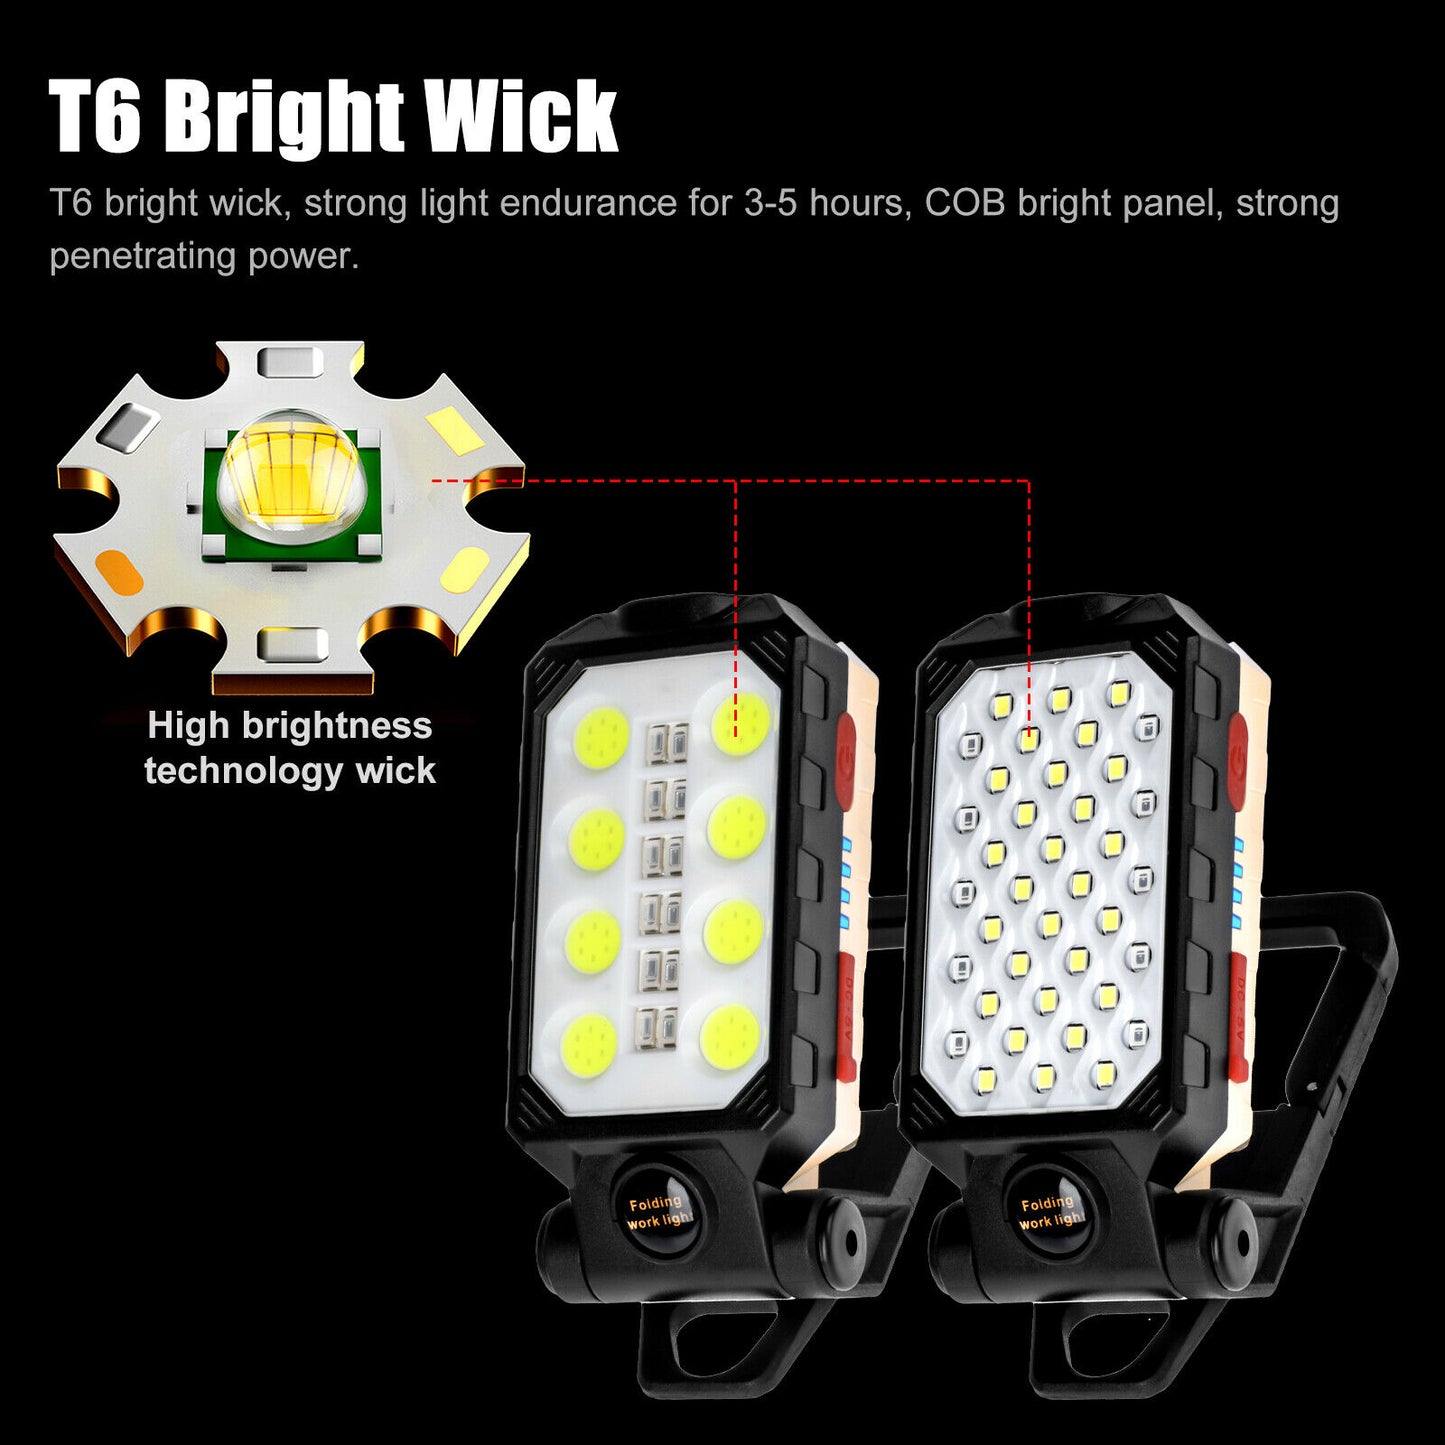 Magnetic COB LED Work Light USB Rechargeable Camping Lamp Torch Flashlight + Hook